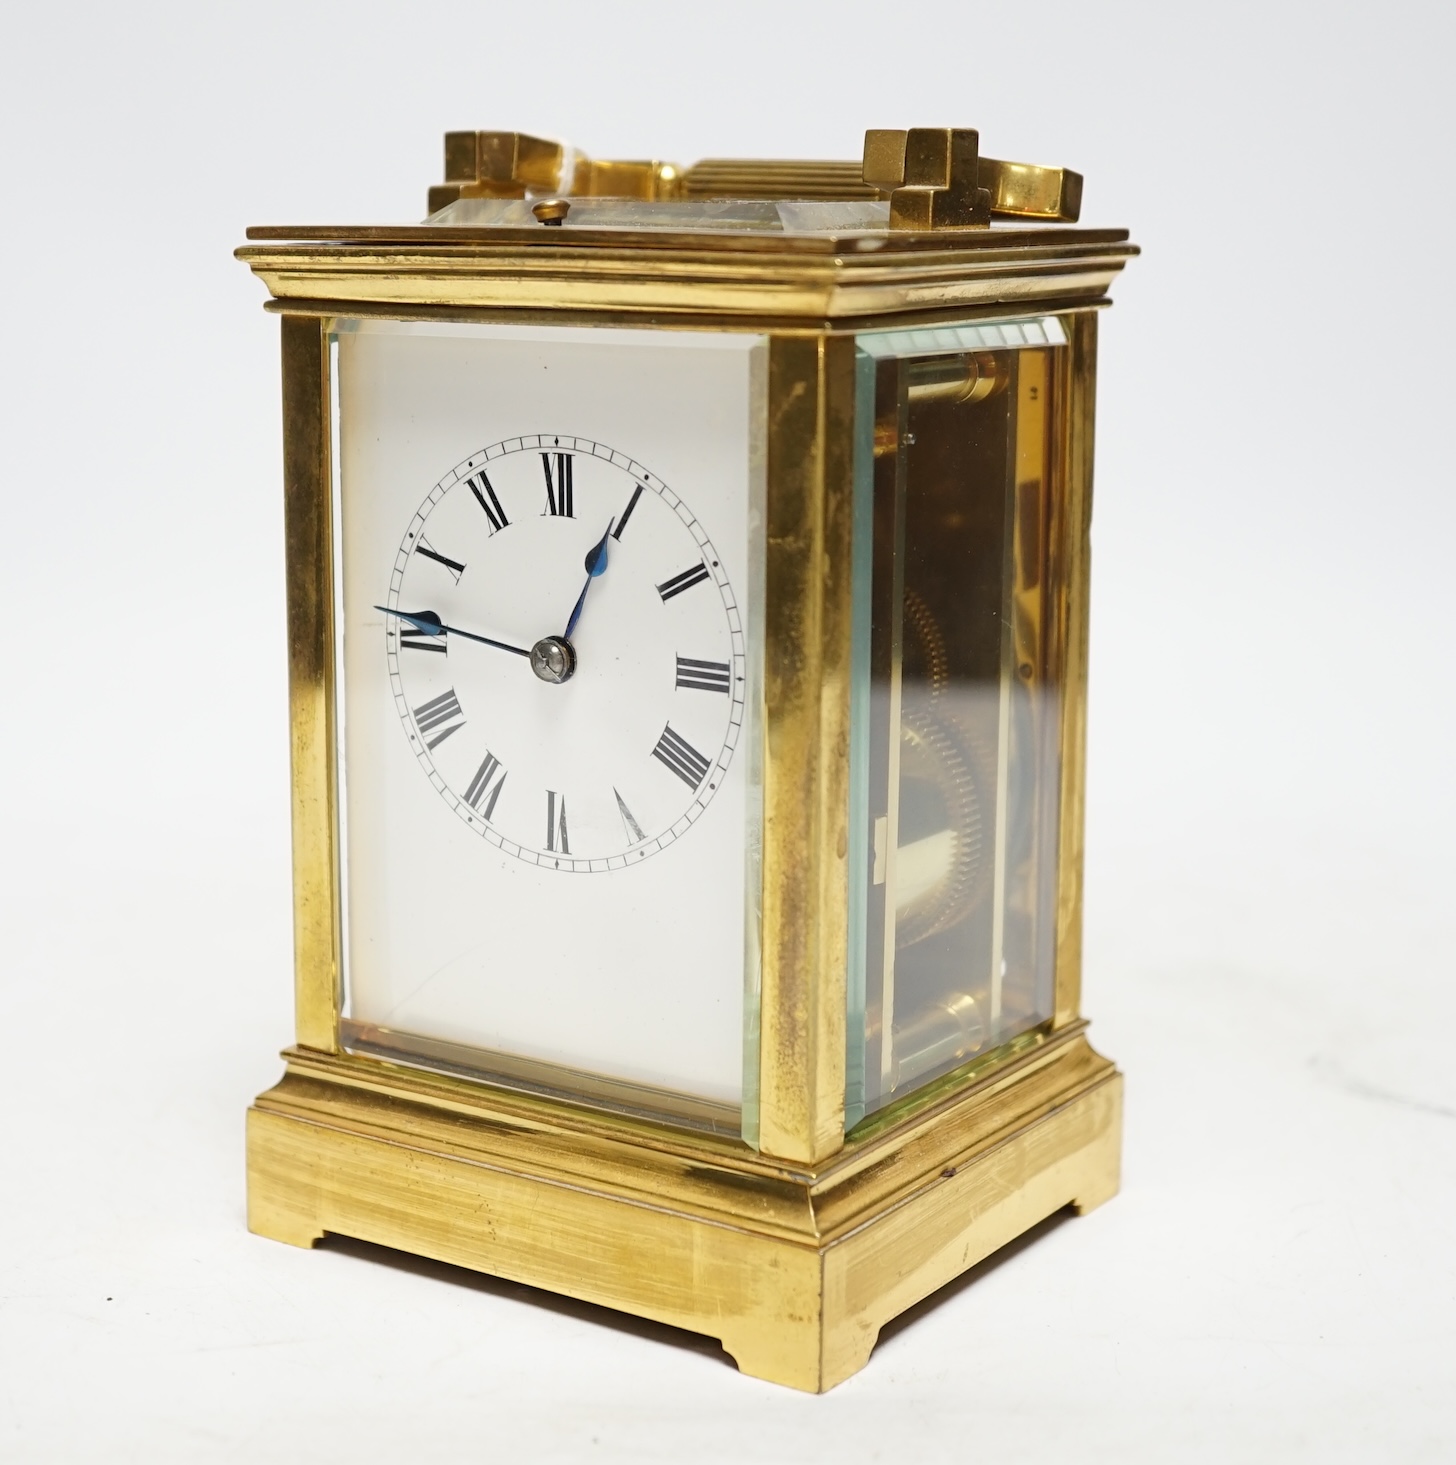 A late 19th century French repeating carriage clock, with Richard movement, in travelling case with key, 15cm high. Condition - good not tested for time keeping